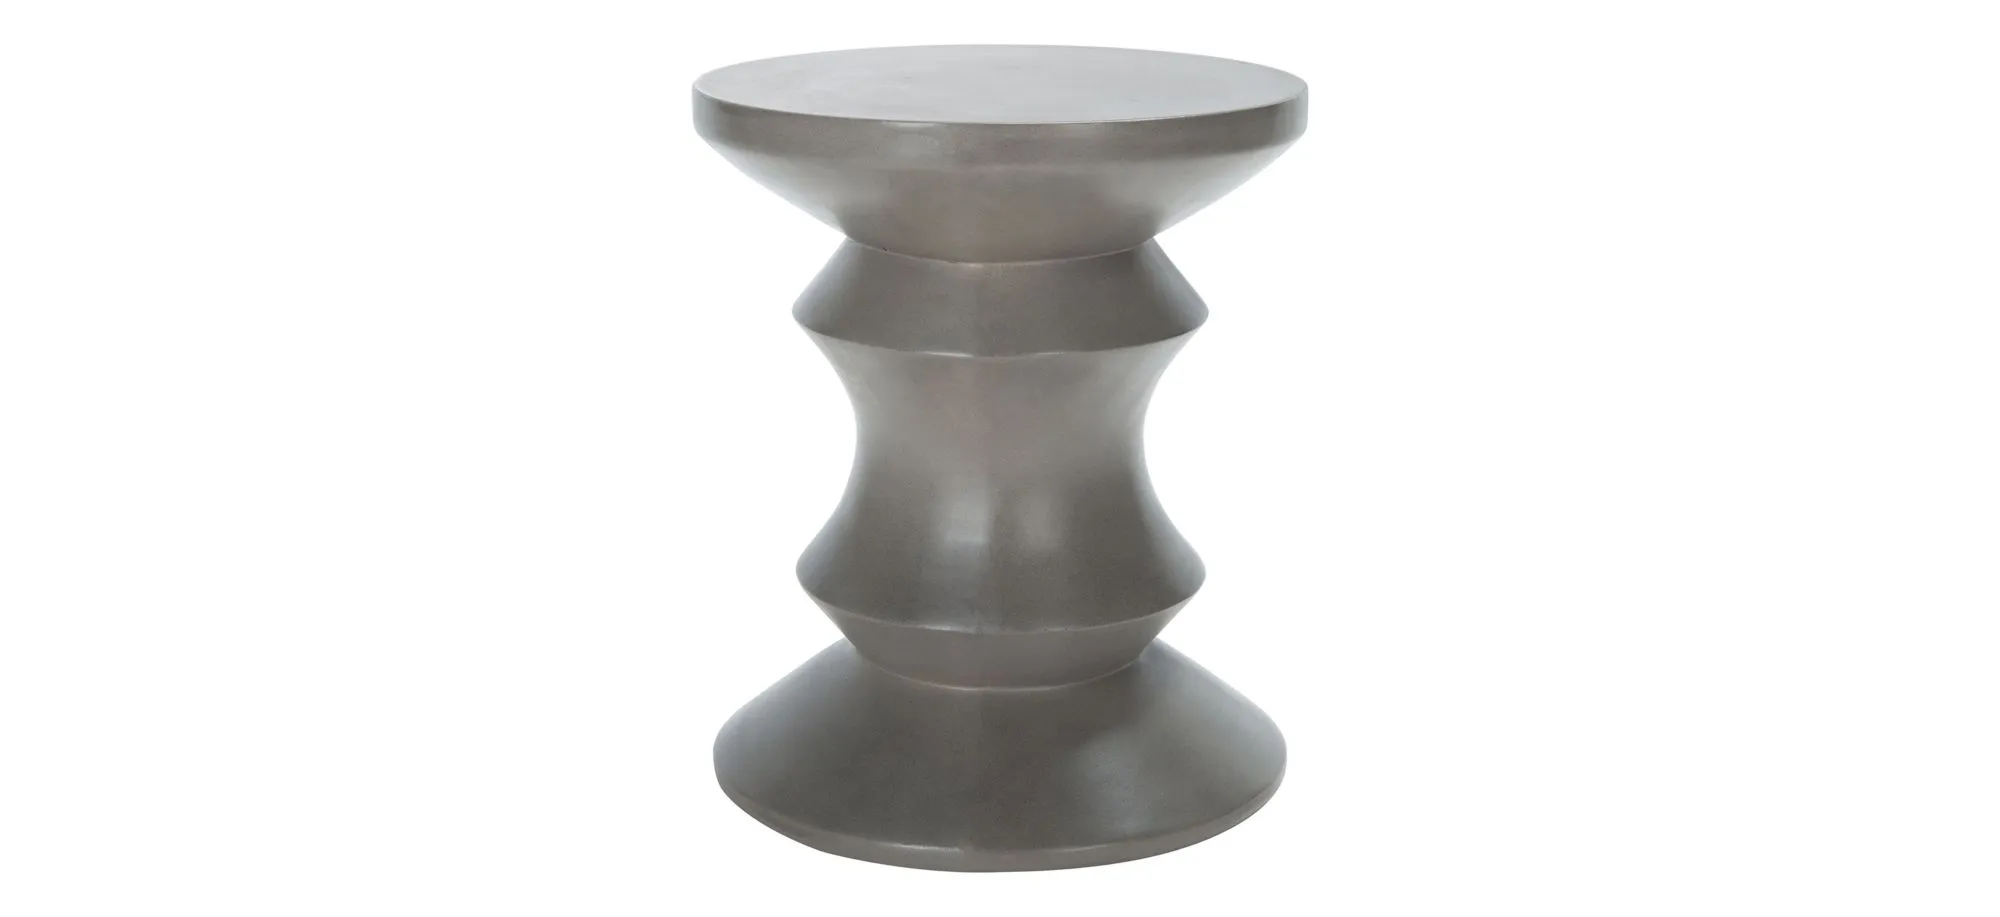 Palmdale Outdoor Concrete Accent Stool in Espresso Brown by Safavieh